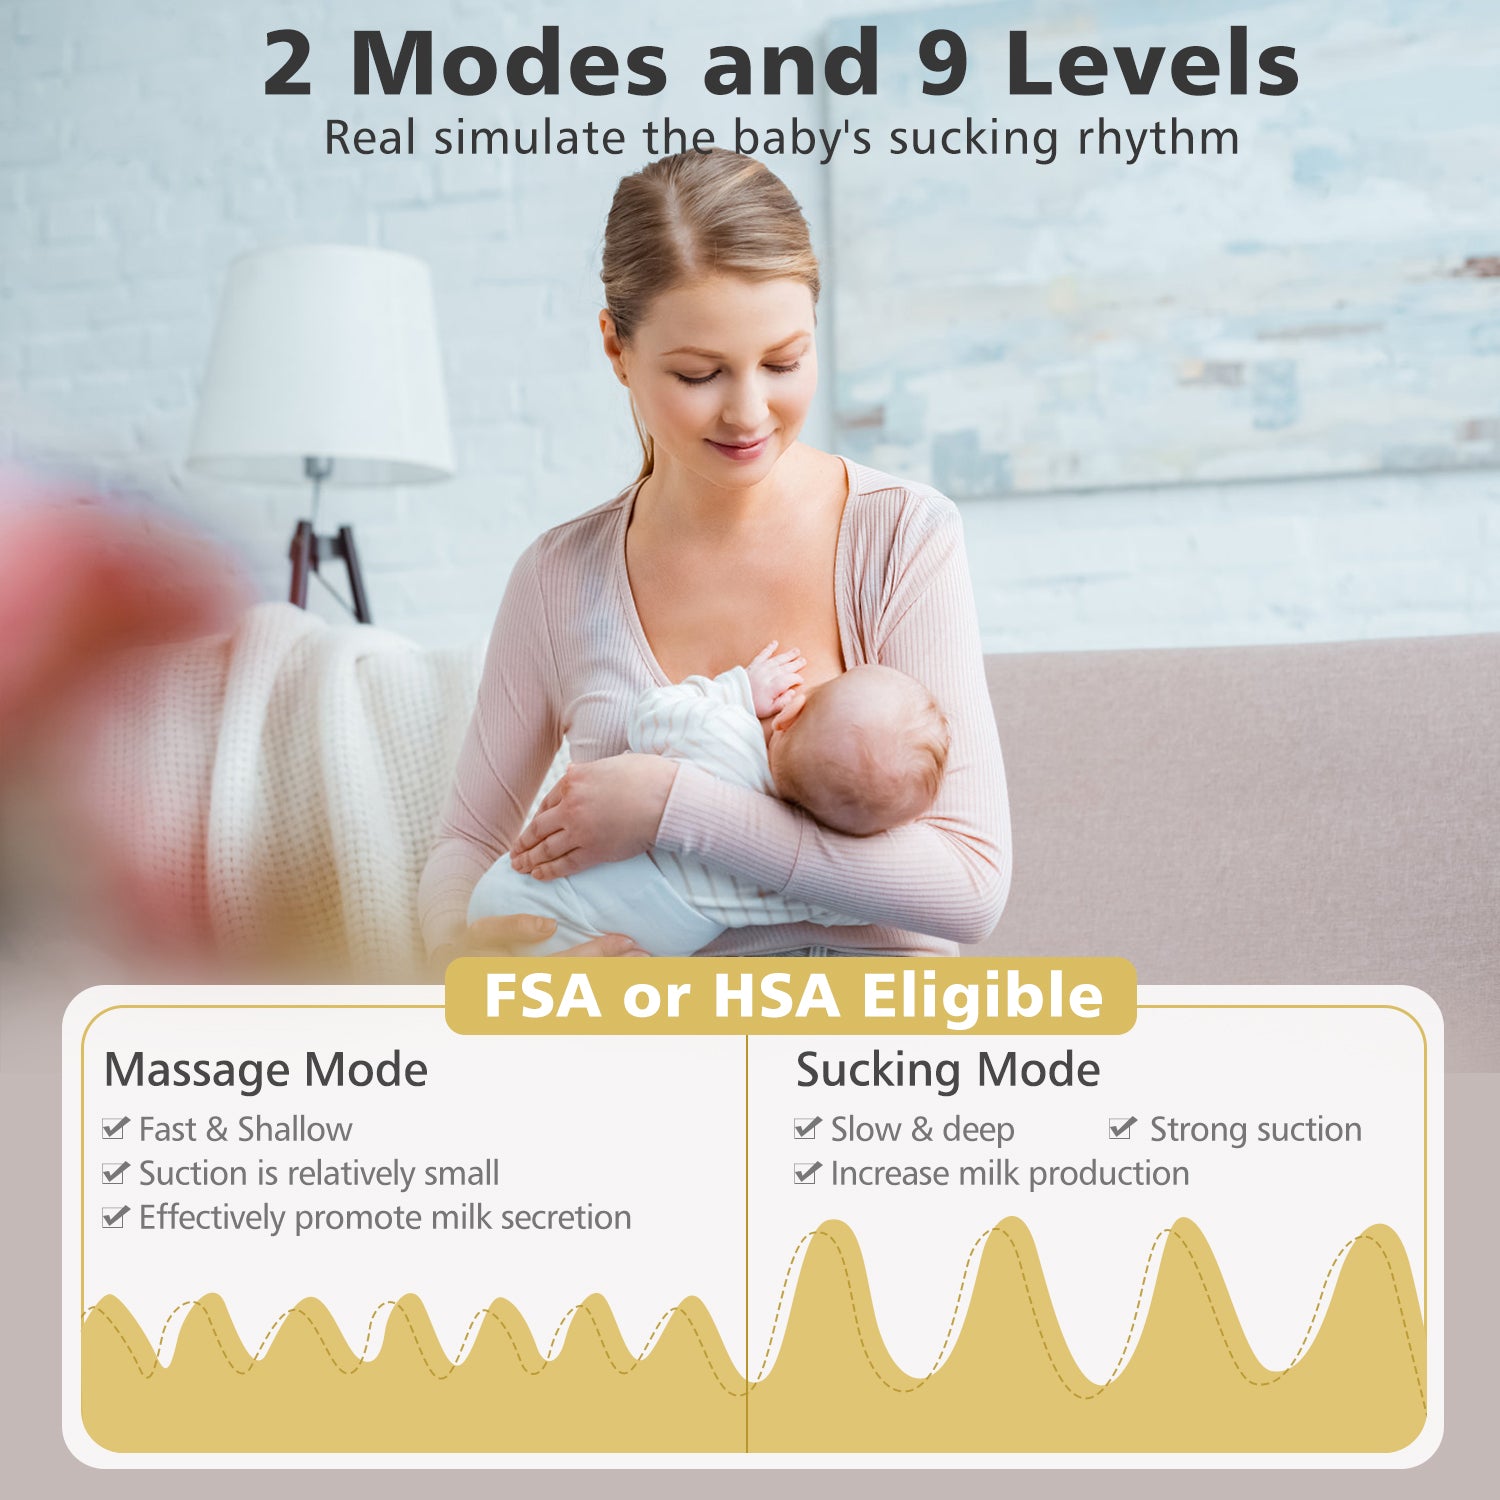 MISSAA Wearable Portable Electric Breast Pump with Adjustable Suction - 2 Pack, Low Noise, Efficient, and Hands-Free Pumping for Breastfeeding Mothers